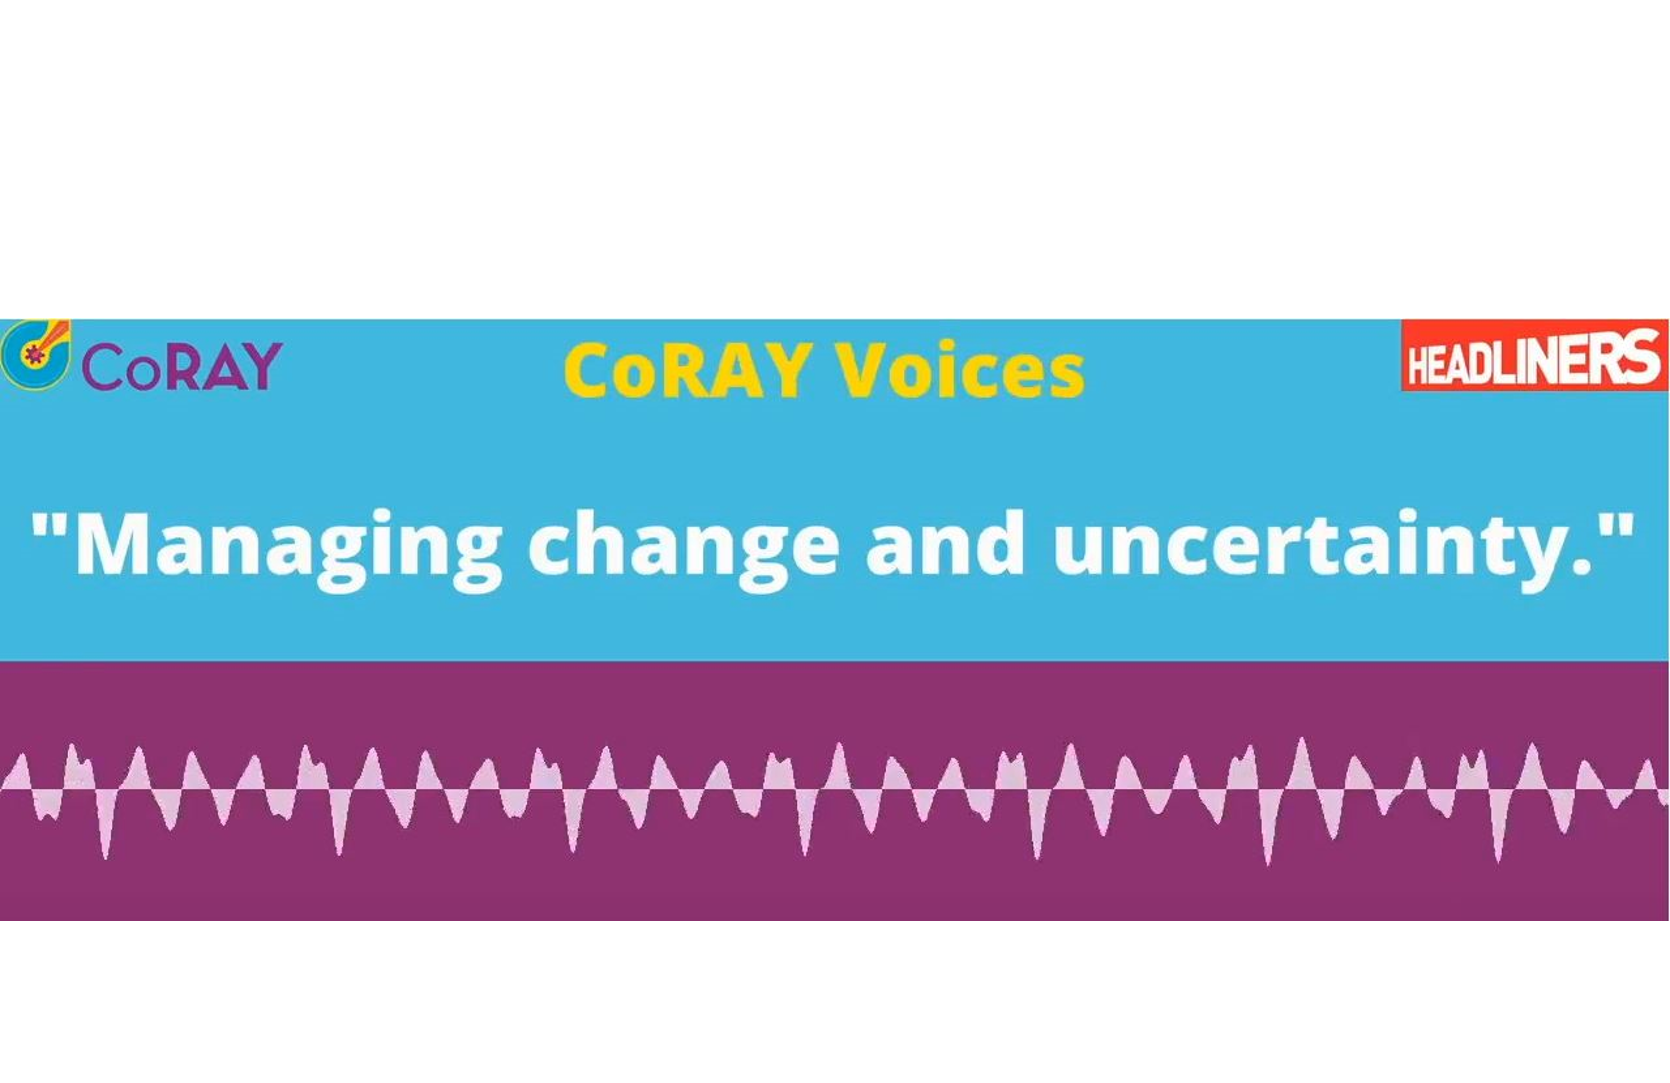 CoRay voices podcast on change and uncertainty